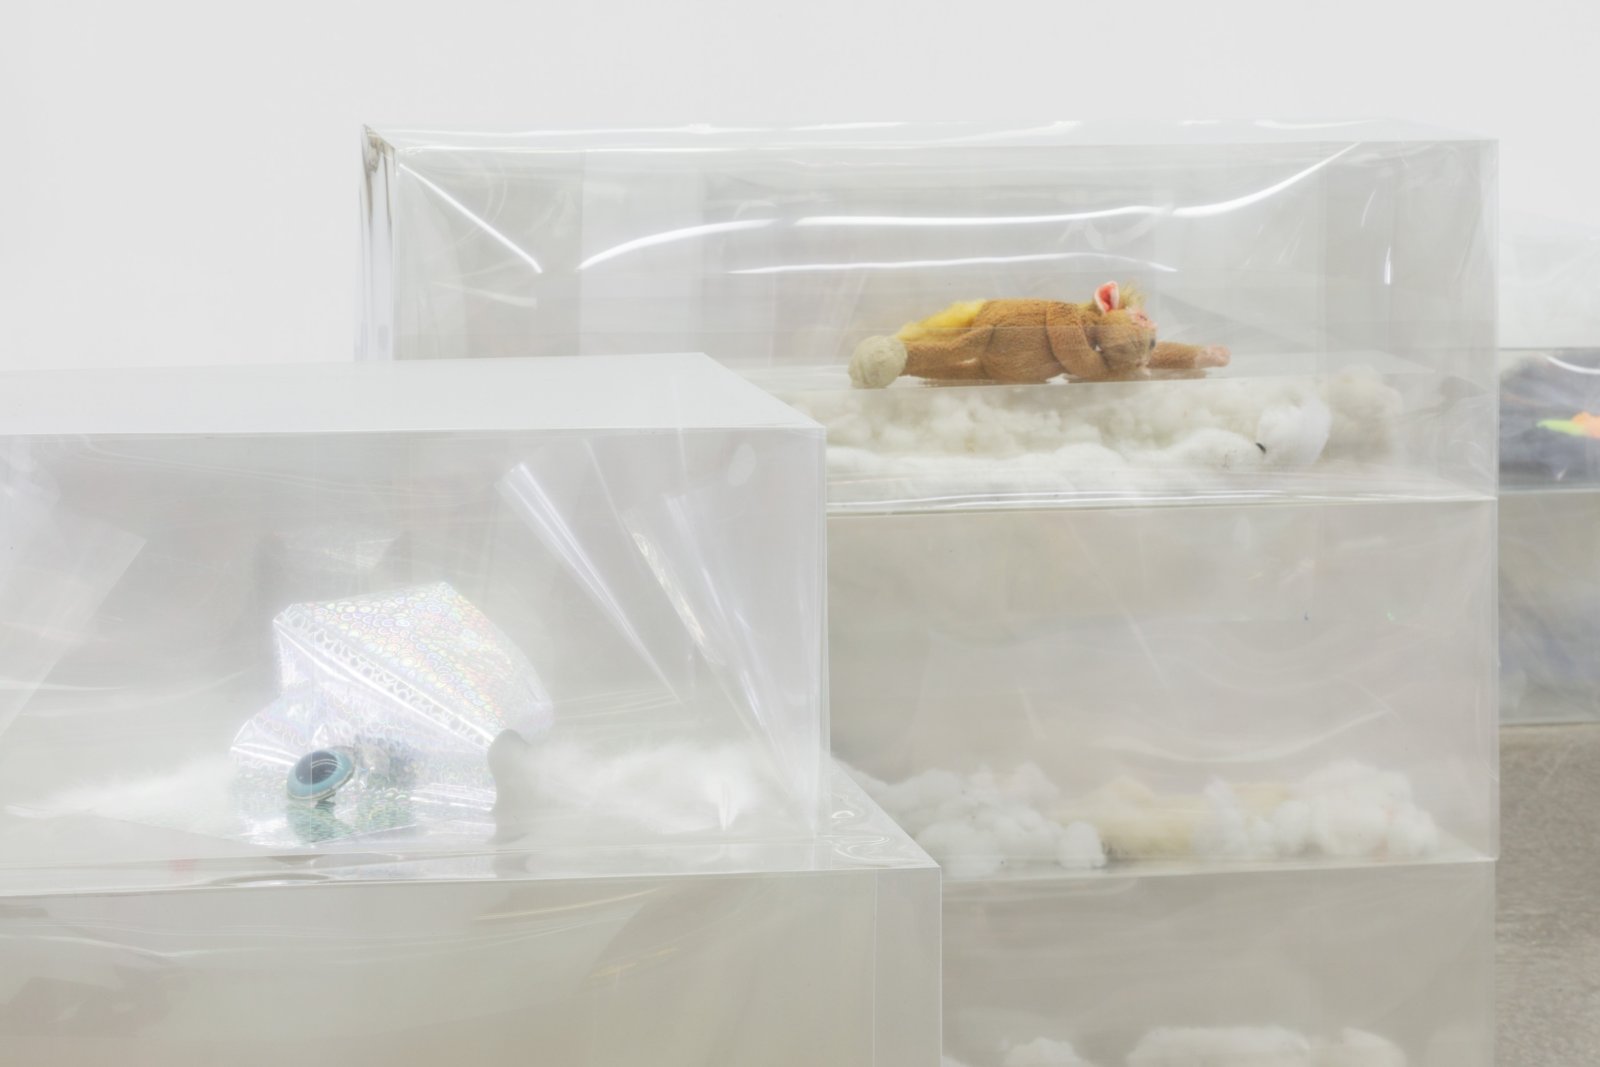 Liz Magor, Pet Co. (detail), 2018, polyester film, textiles, paper, stuffed toys, rat skins, mixed media, 44 x 204 x 156 in. (112 x 518 x 396 cm). Installation view, BLOWOUT, The Renaissance Society, Chicago, USA, 2019